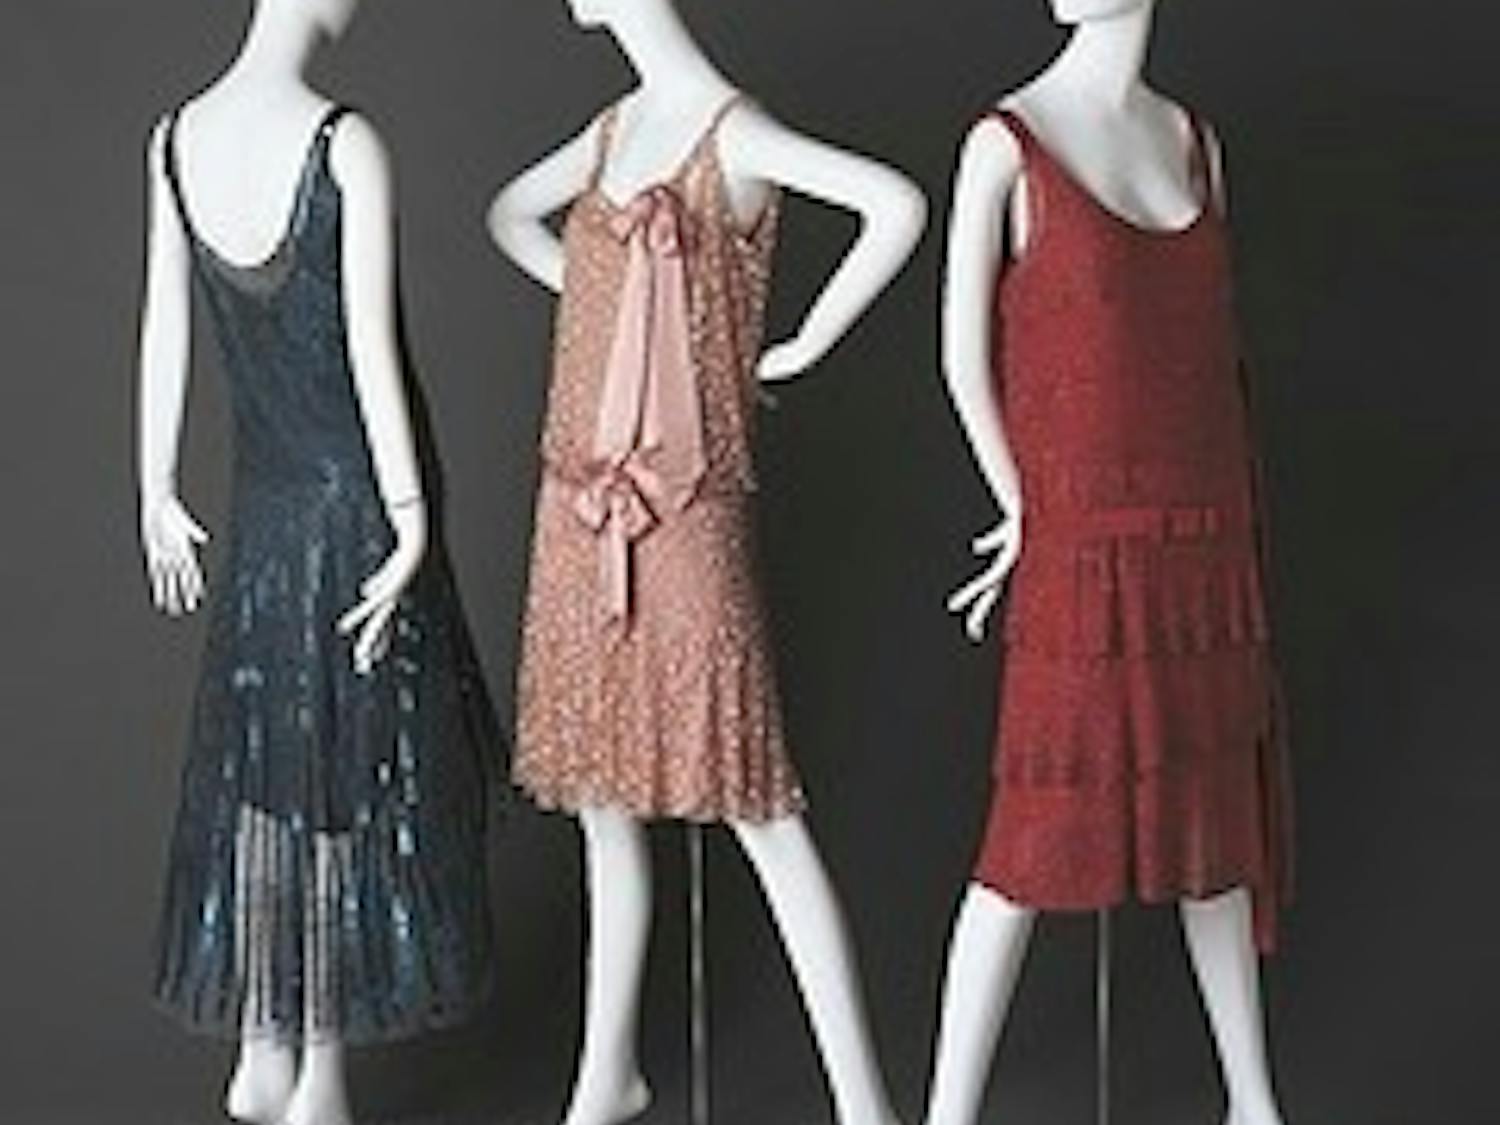 Chanel dresses from the 1920s. Photo from phxart.org.